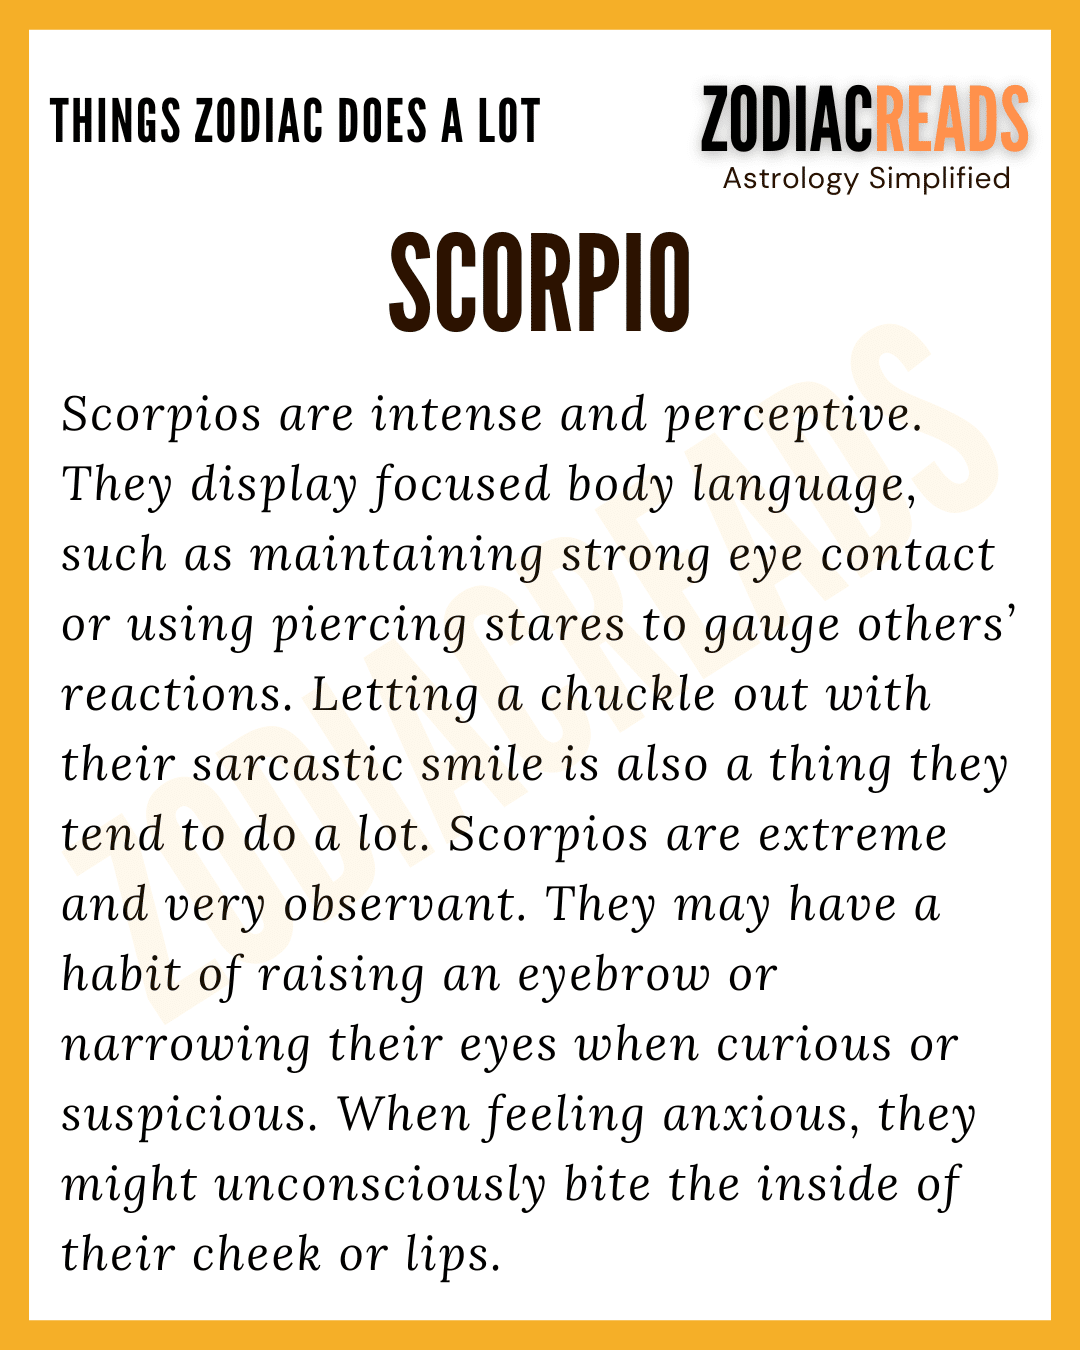 Scorpio Things That Zodiac Signs Tend To Do A Lot